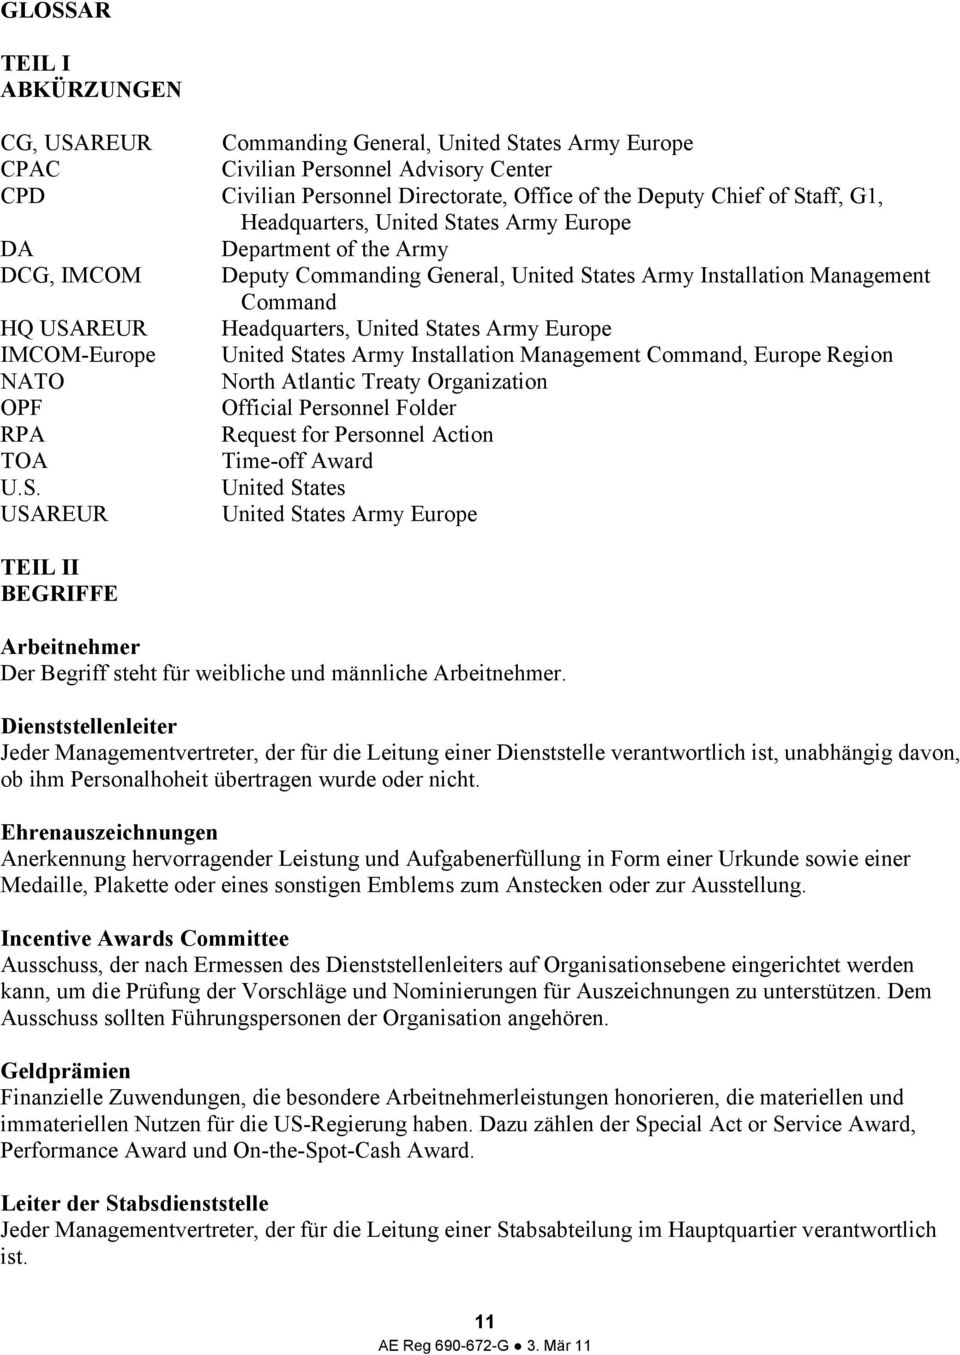 Army Europe IMCOM-Europe United States Army Installation Management Command, Europe Region NATO North Atlantic Treaty Organization OPF Official Personnel Folder RPA Request for Personnel Action TOA